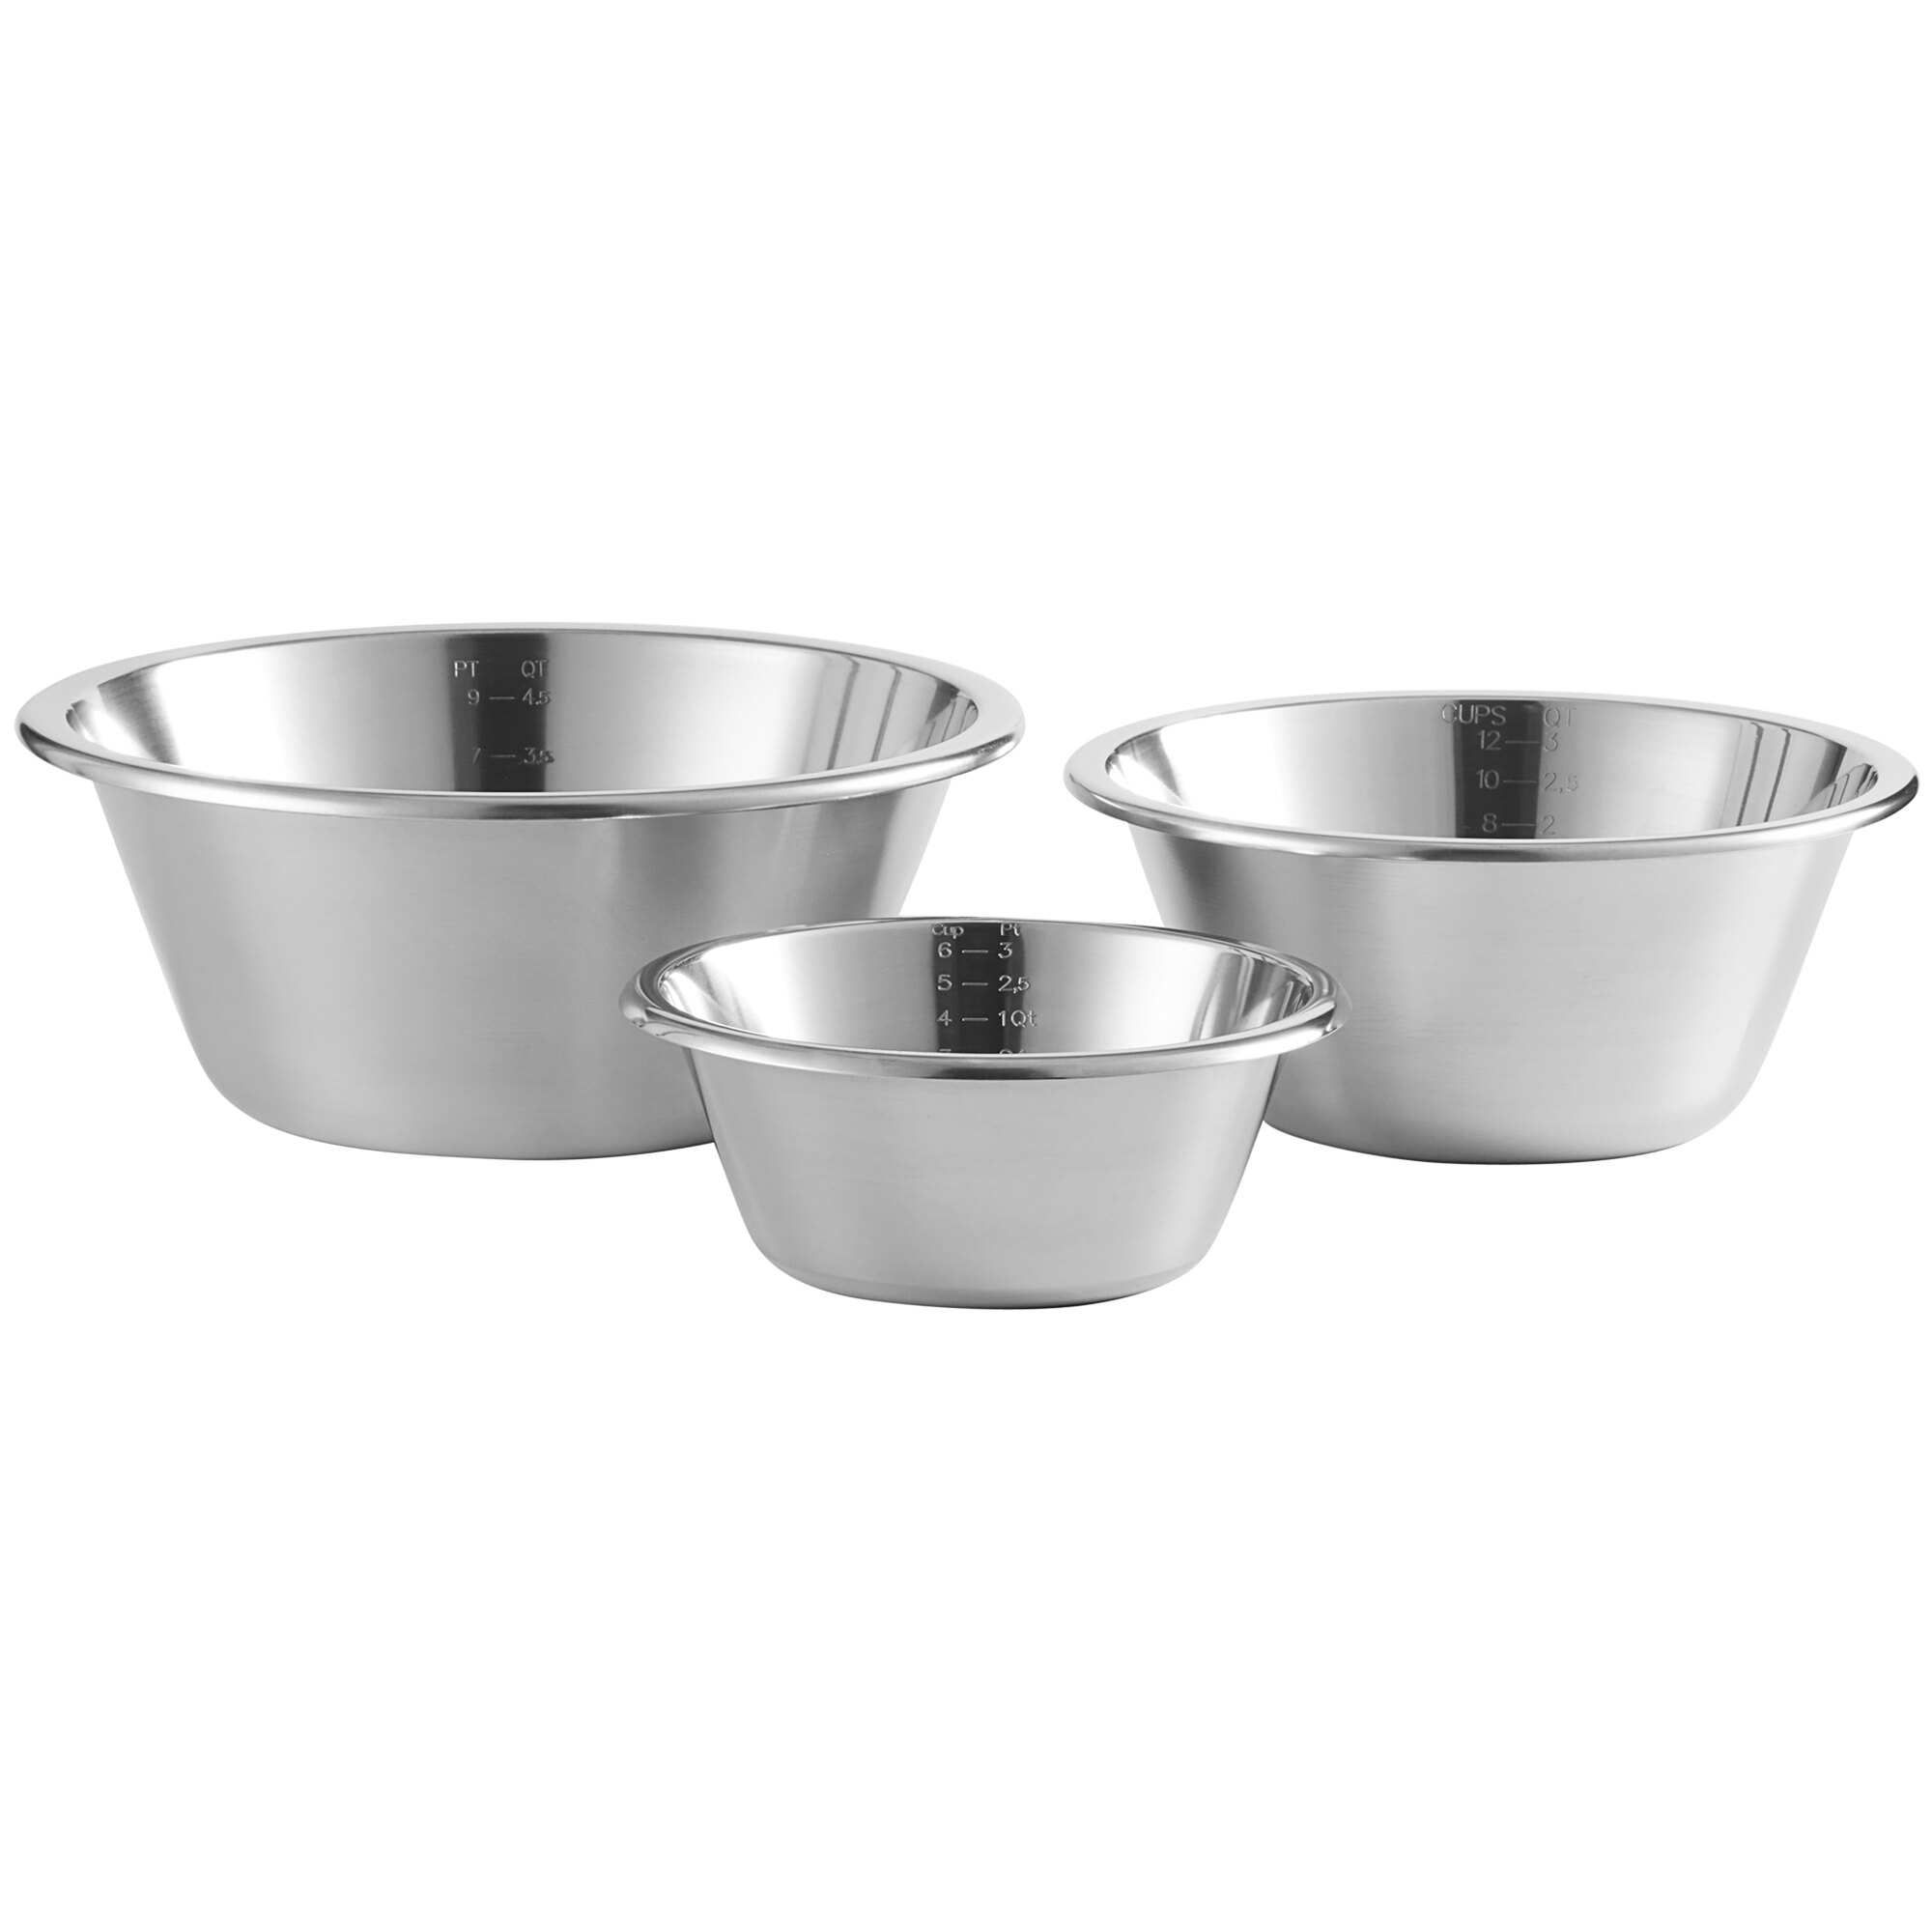 euro stainless steel mixing bowls